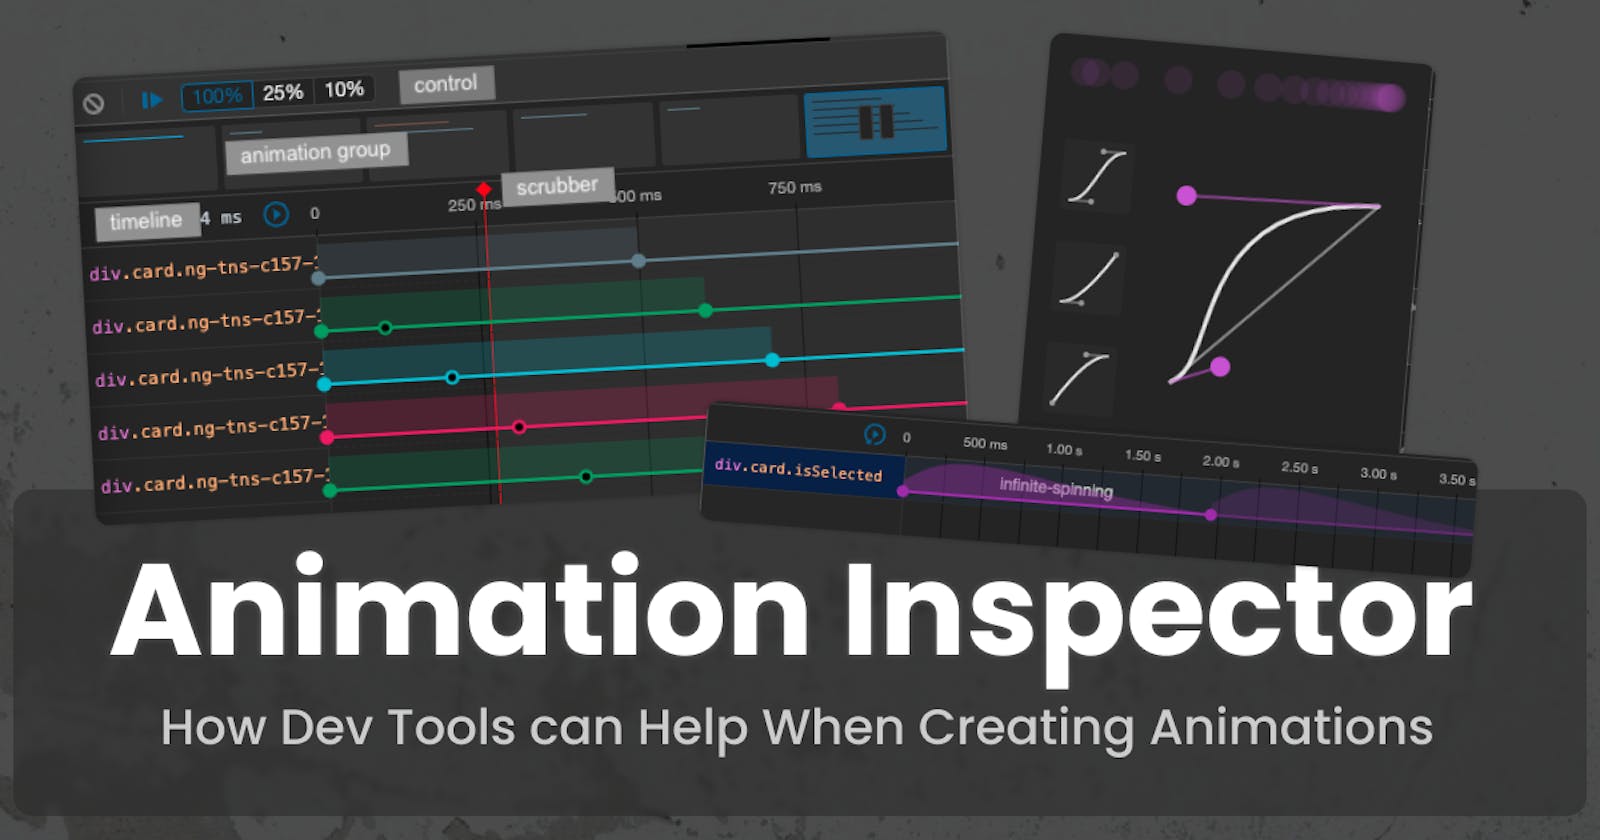 How DevTools can help when Creating Animations